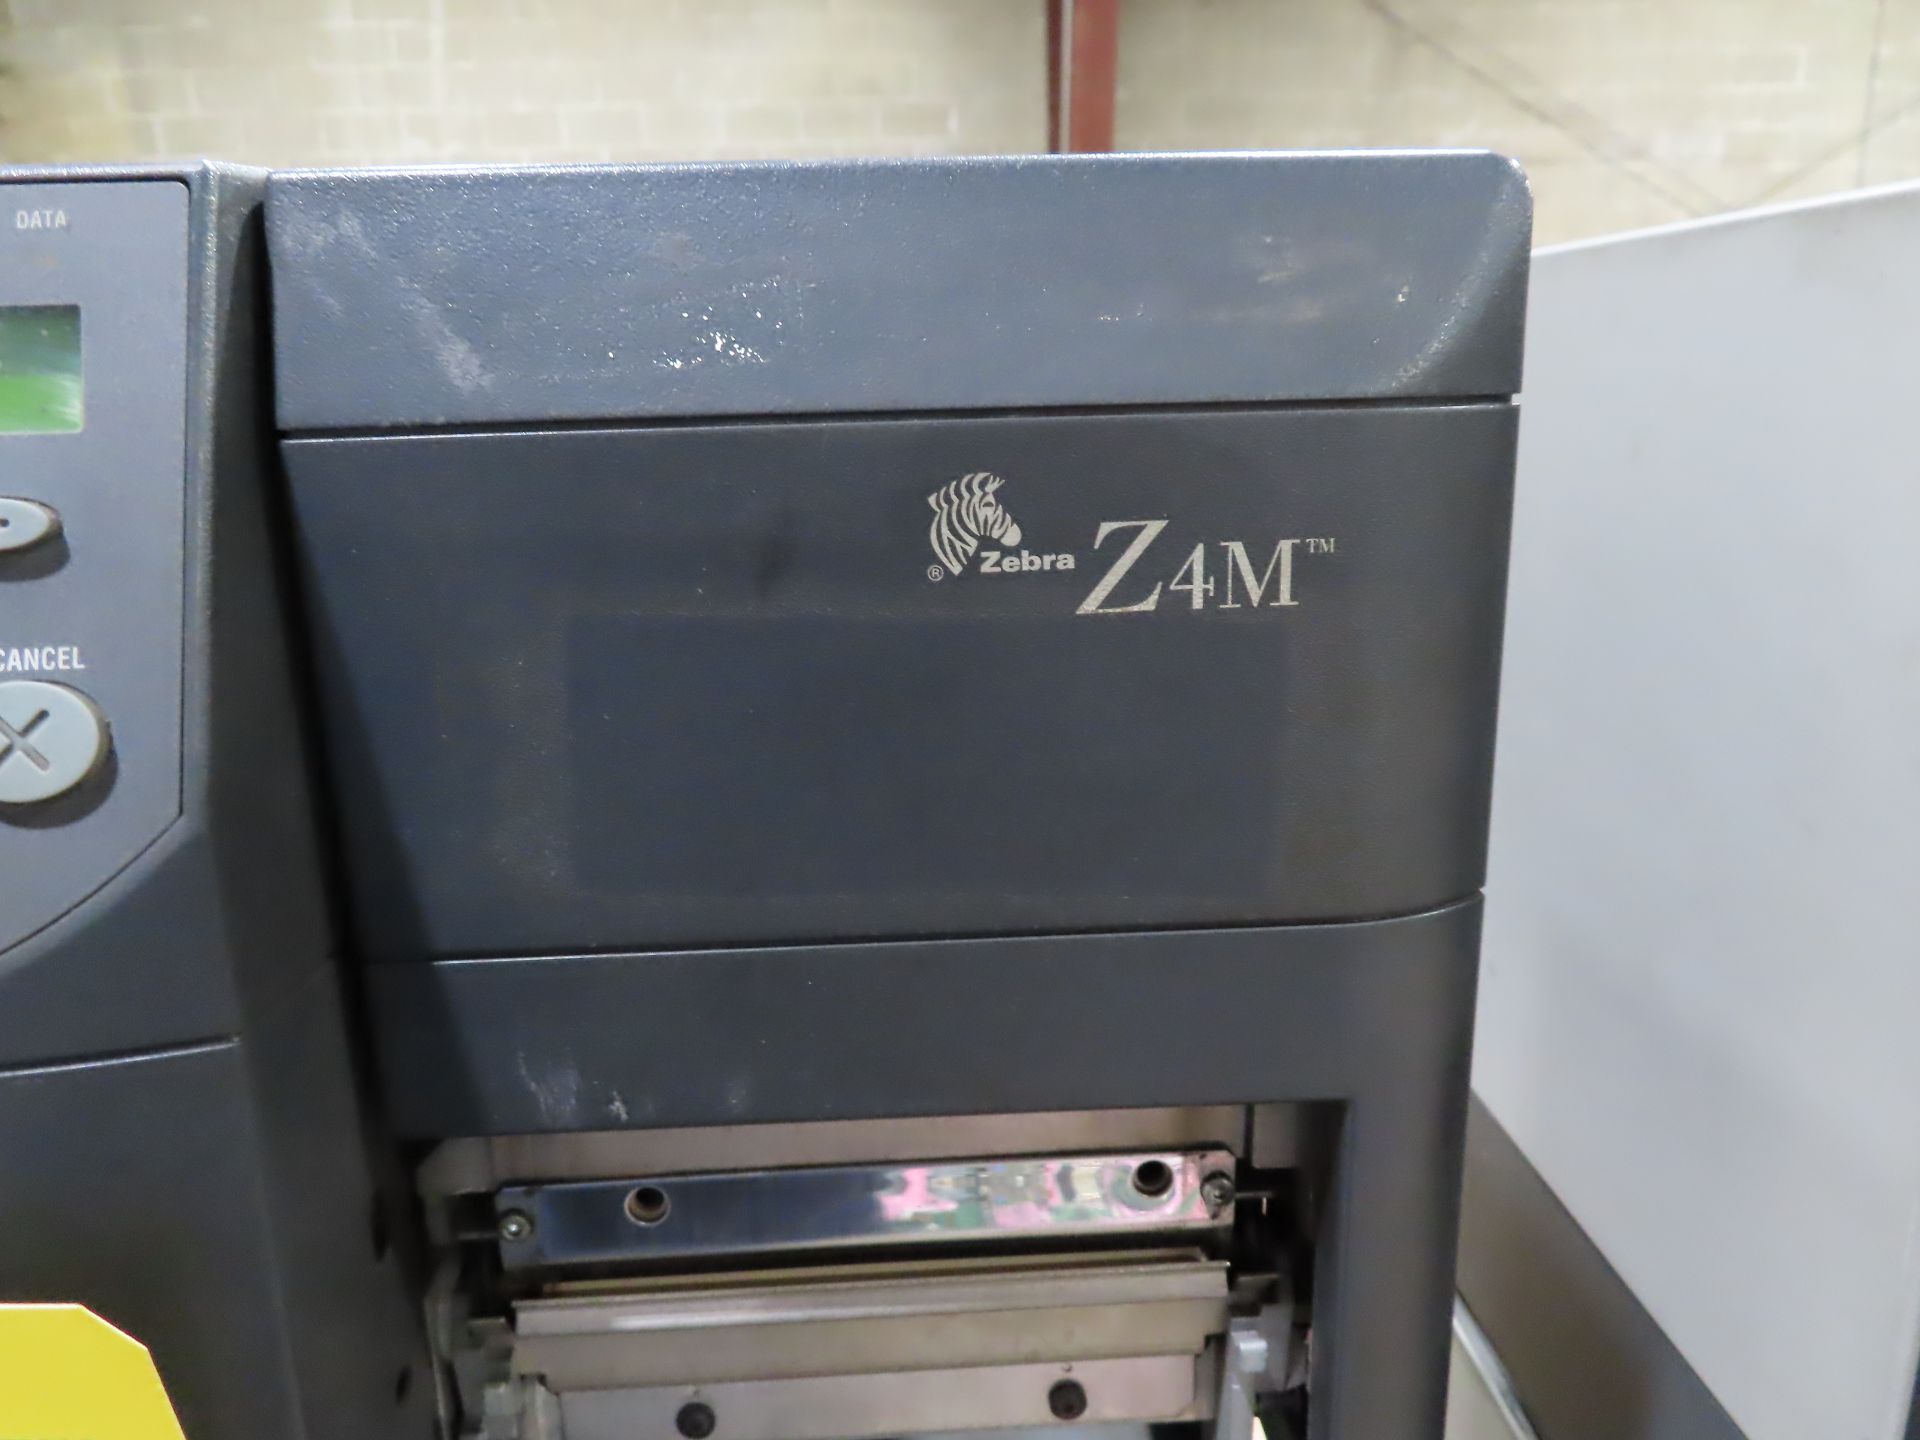 Qty 2 Zebra industrial printers, Z4M, and Z4Mplus, as always, with Brolyn LLC auctions, all lots can - Image 2 of 3